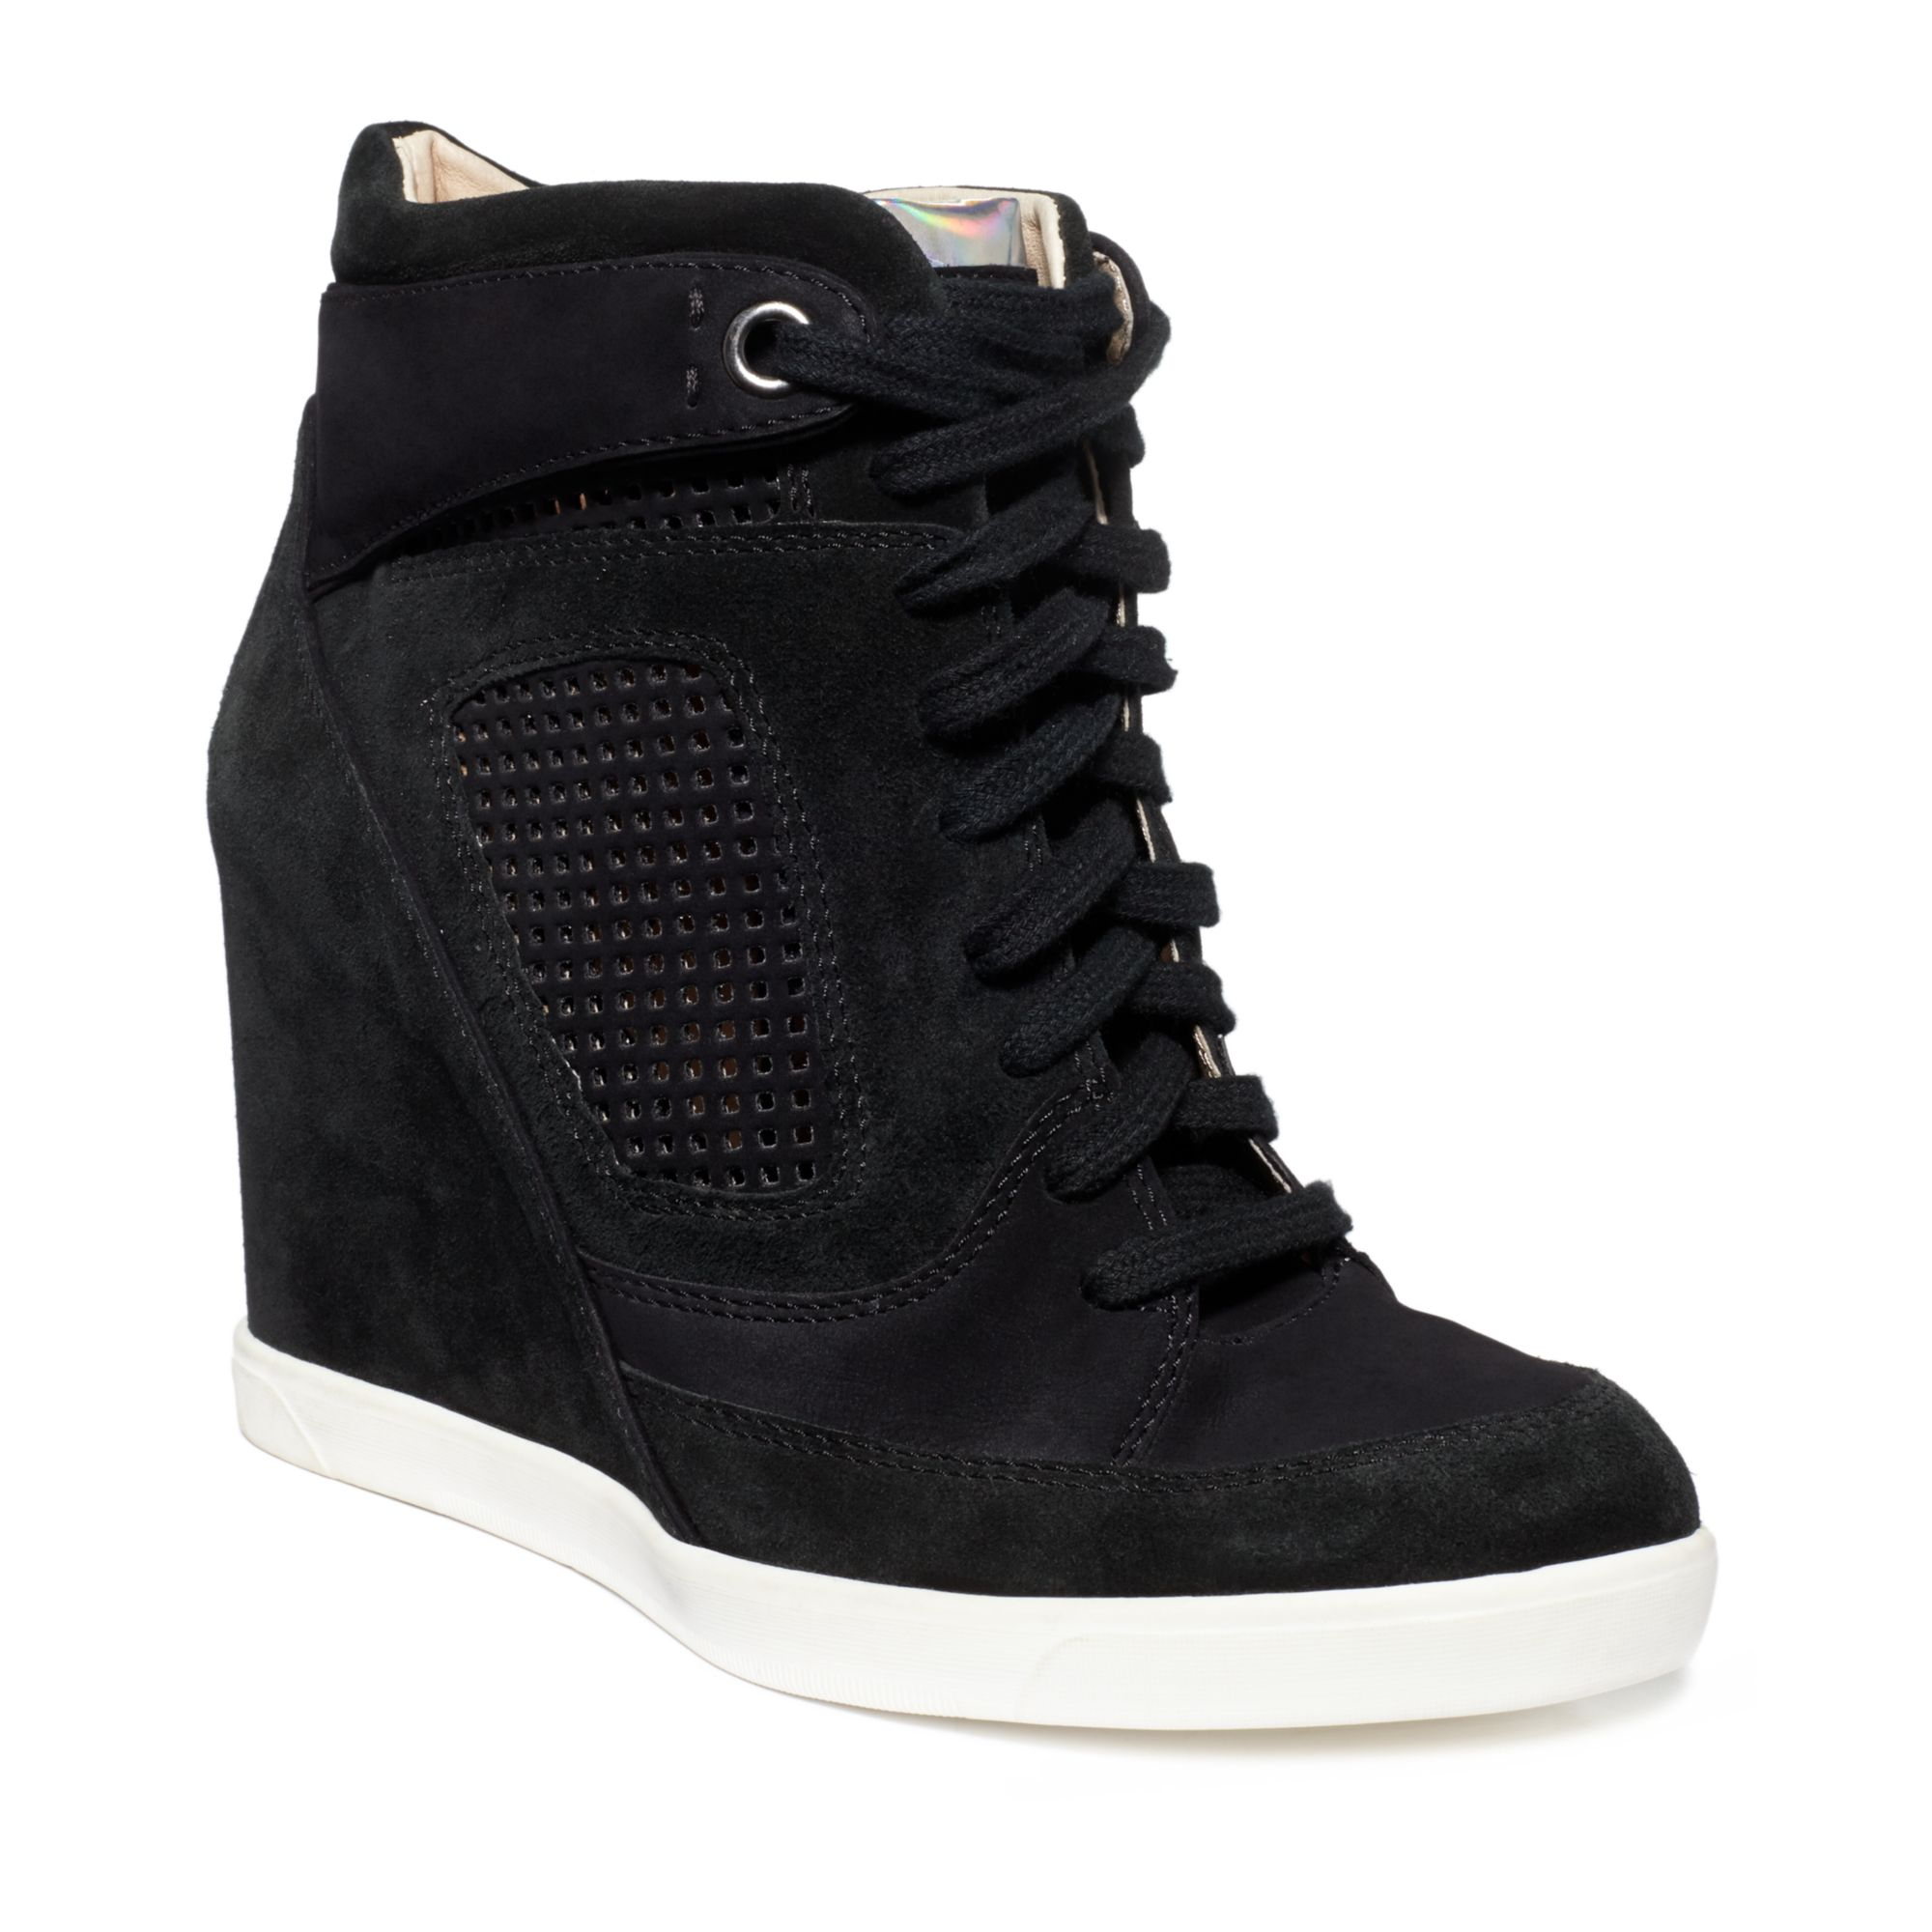 French Connection Marla Wedge Sneakers in Black | Lyst